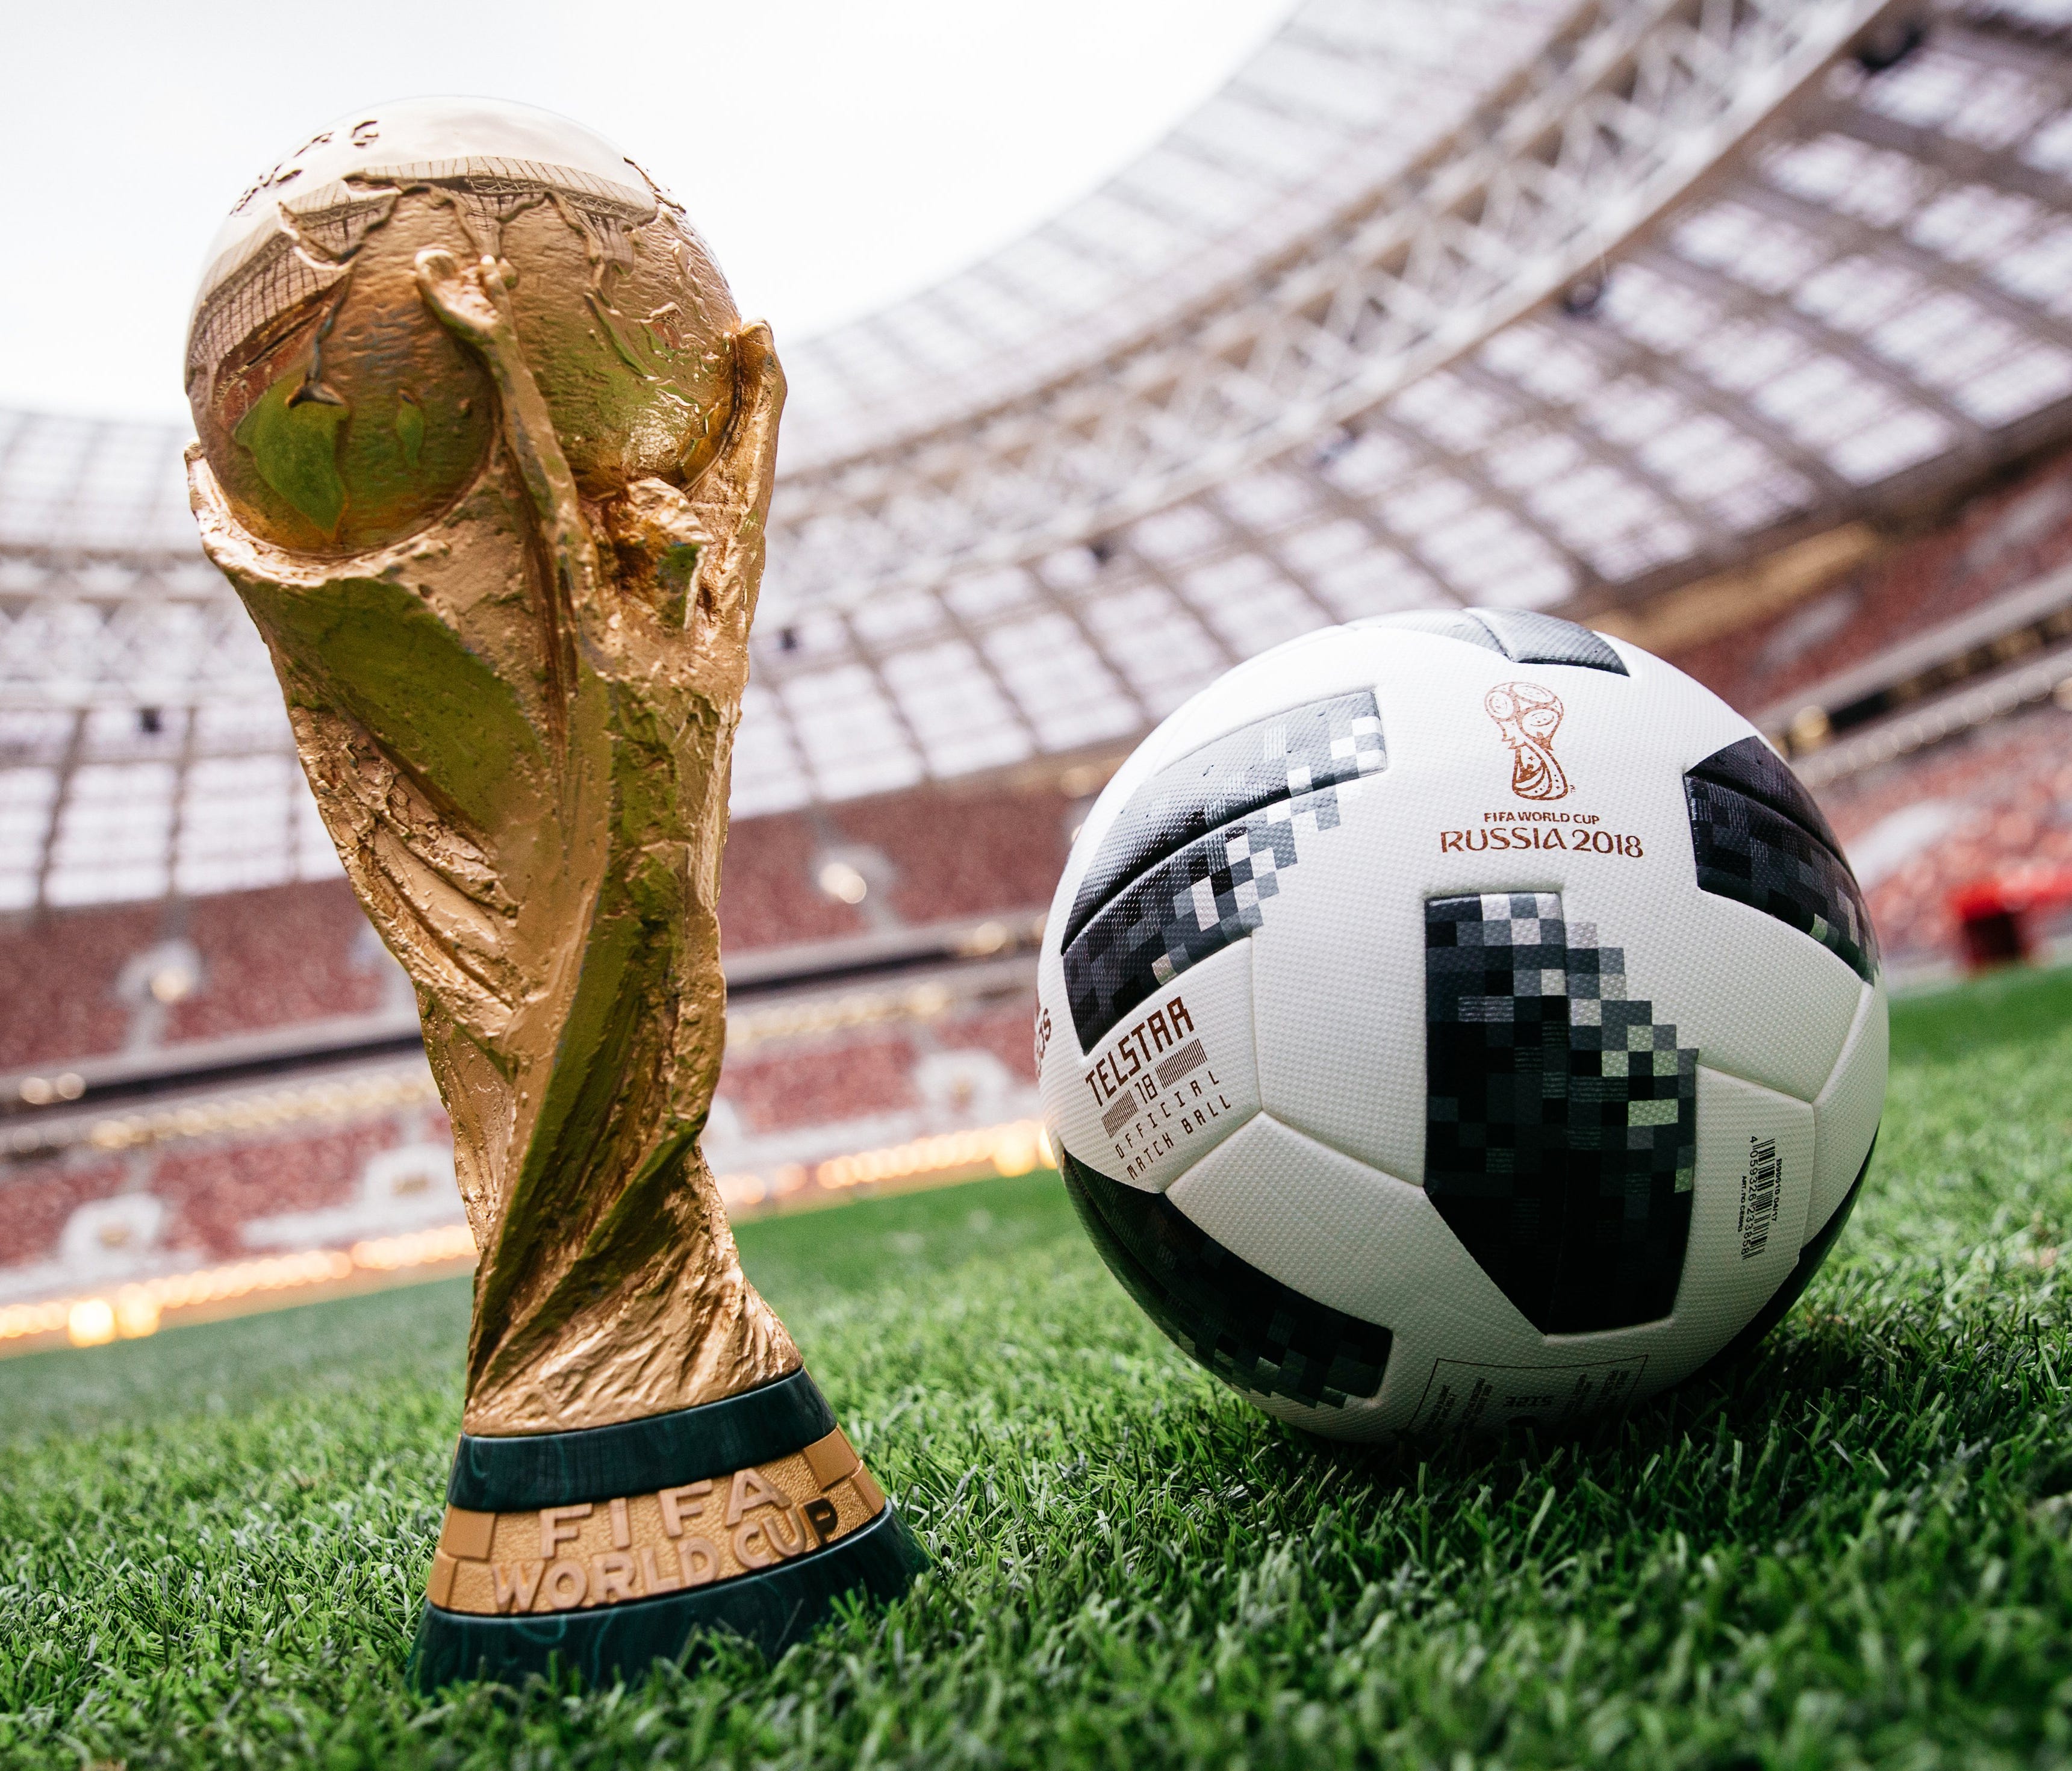 An adidas official match ball, named Telstar 18, sits next to the FIFA World Cup trophy in Luzhniki Stadium in Moscow.